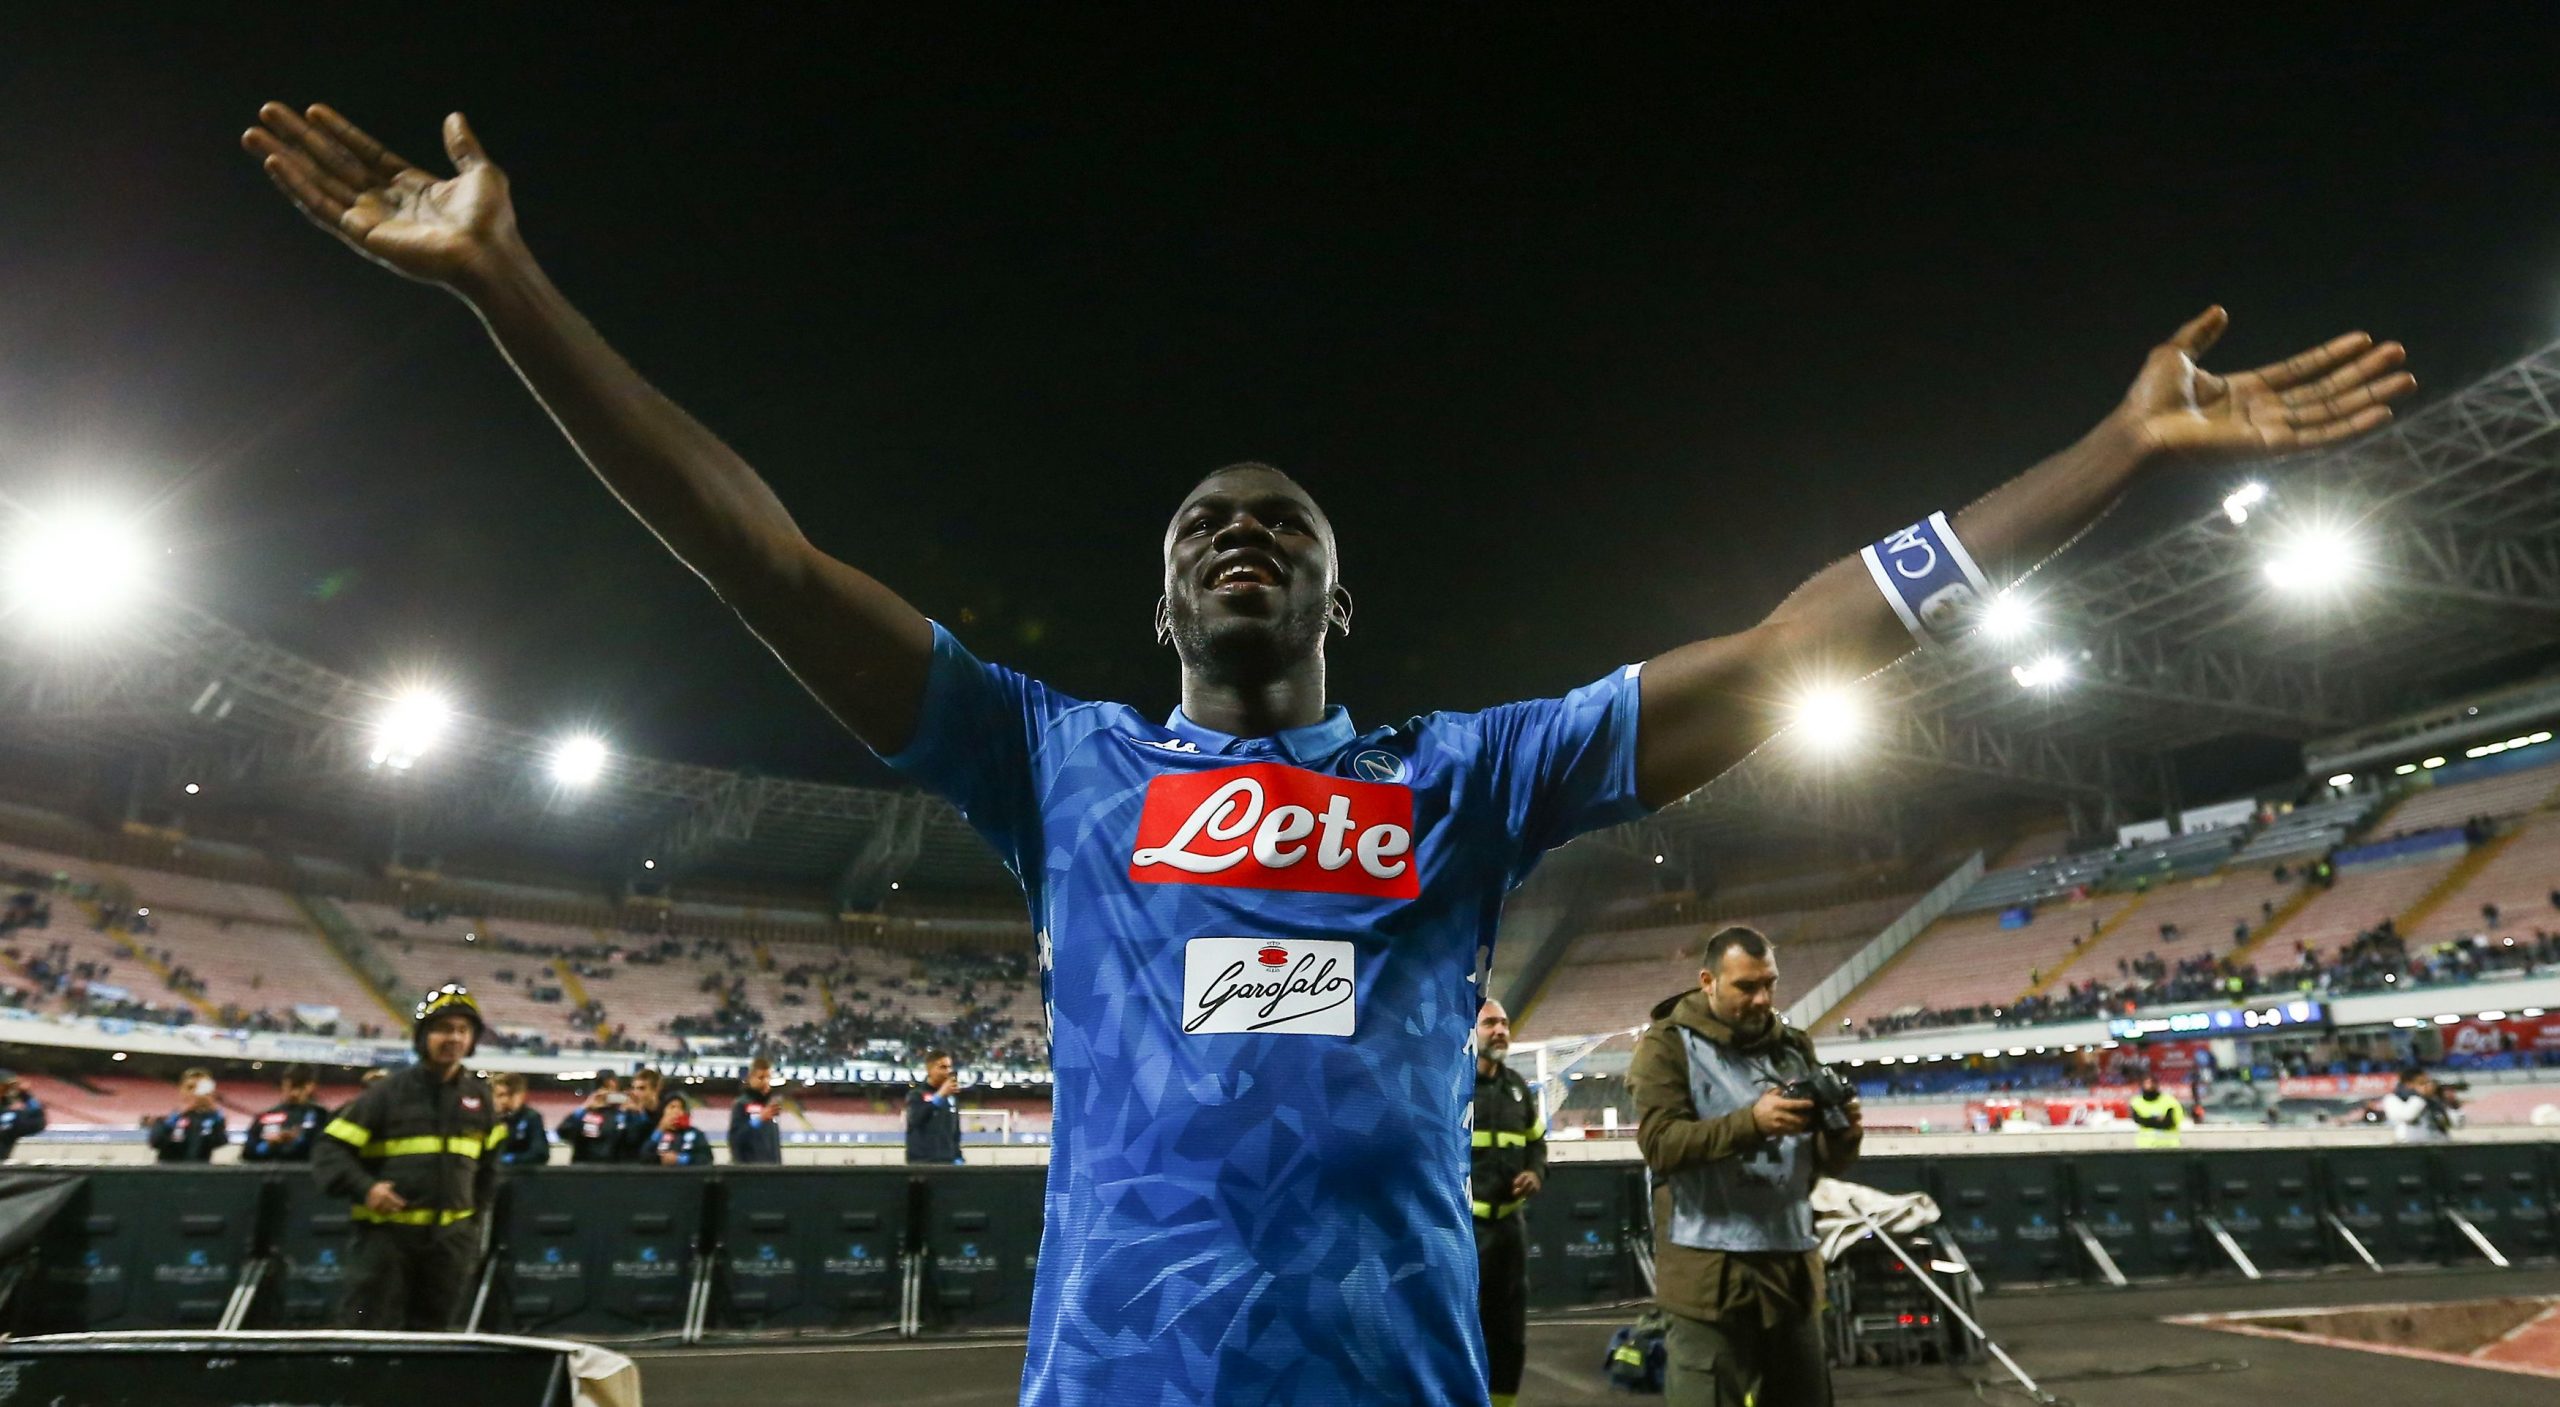 Tottenham Hotspur listed as a potential suitor for Kalidou Koulibaly who is seen in the photo